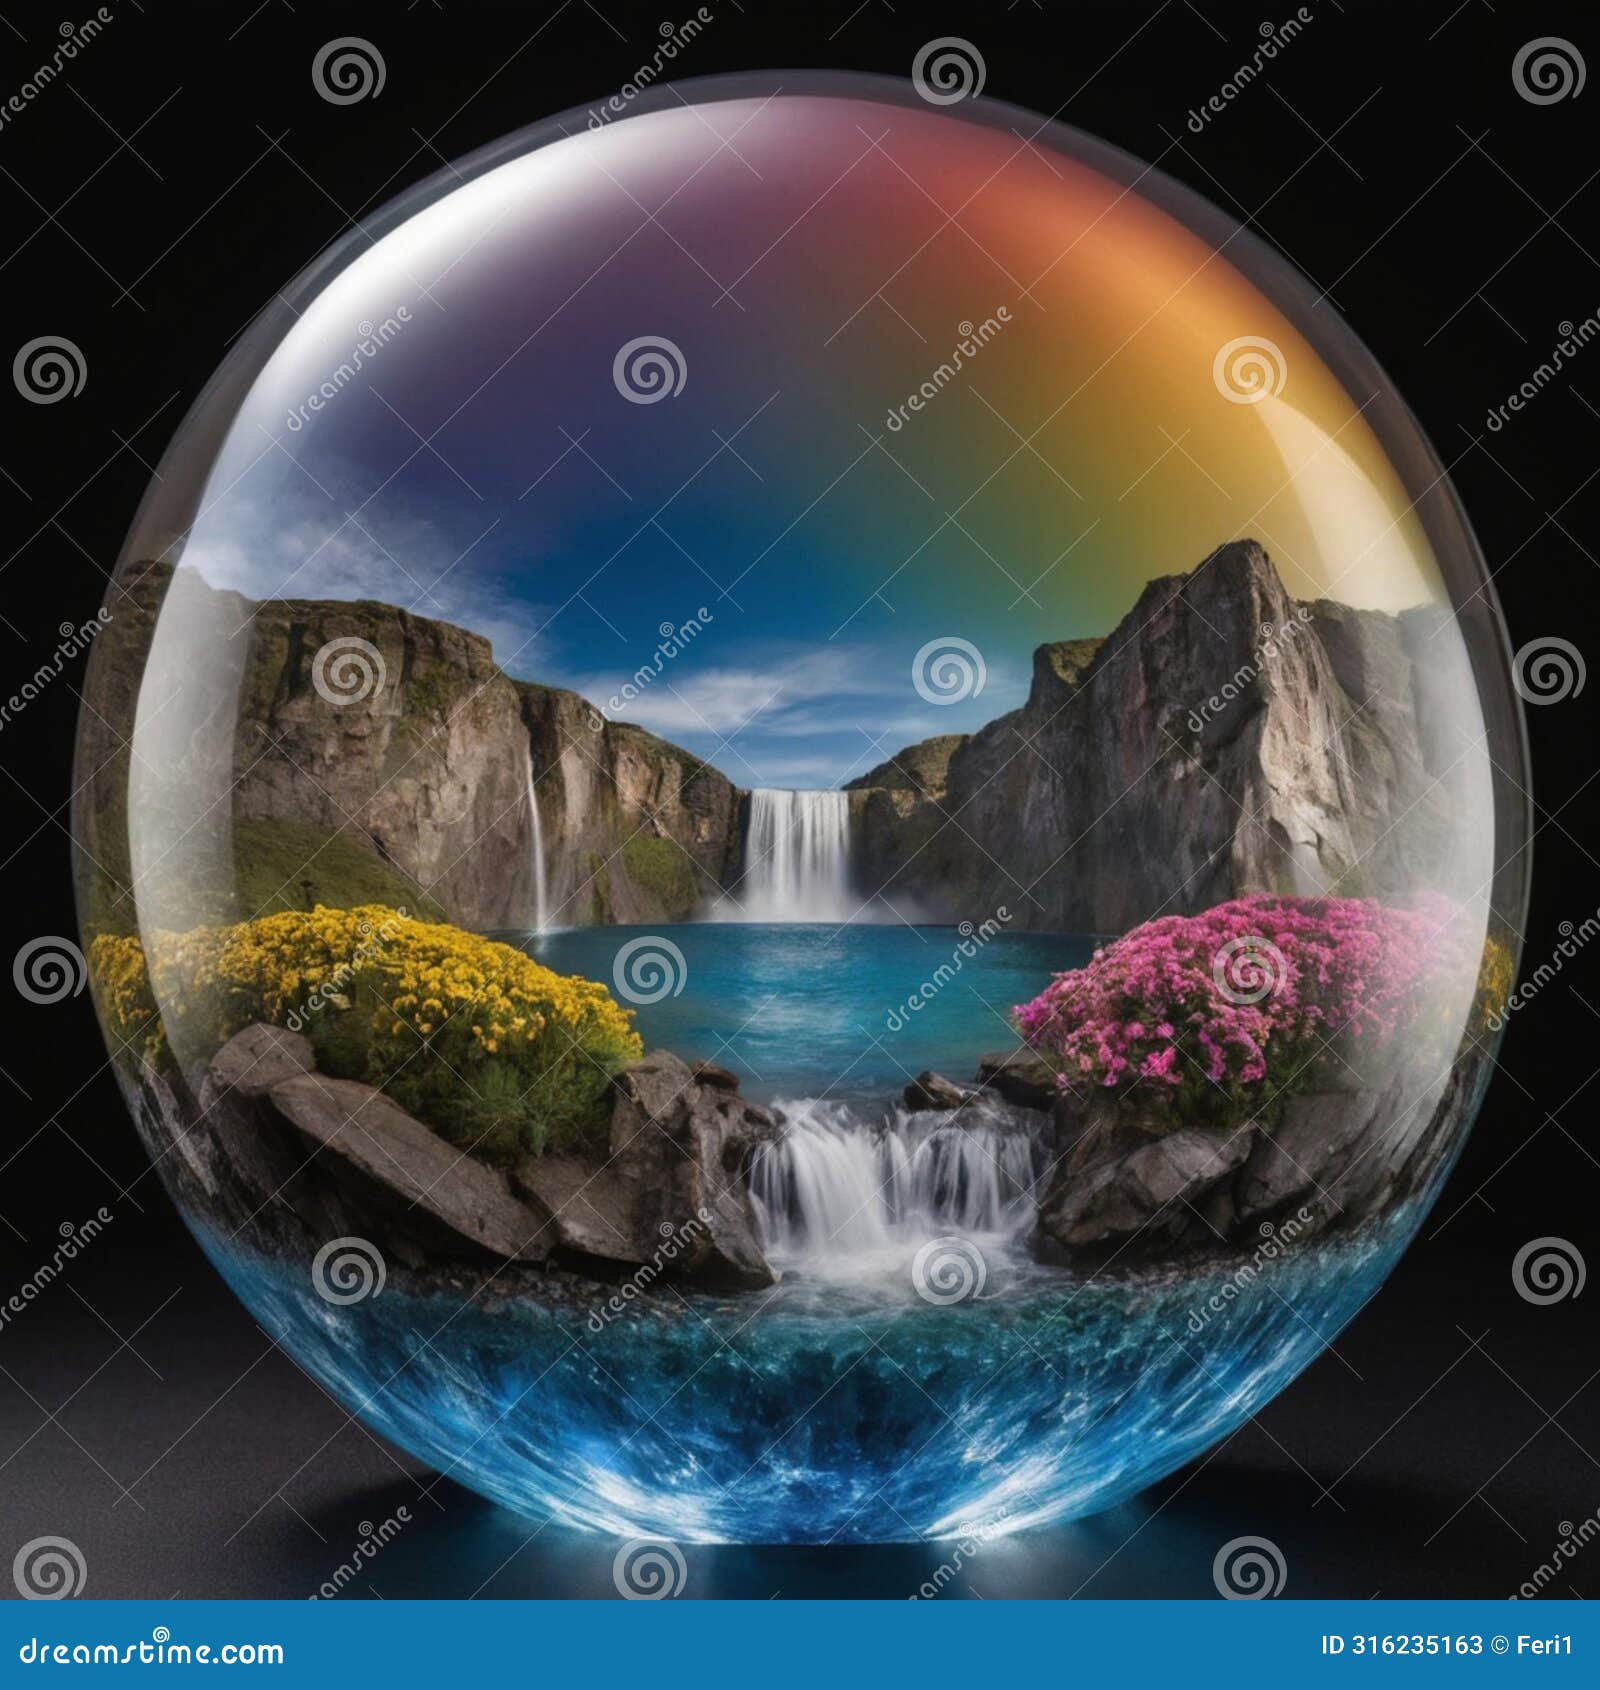 a world enclosed in a glass globe.